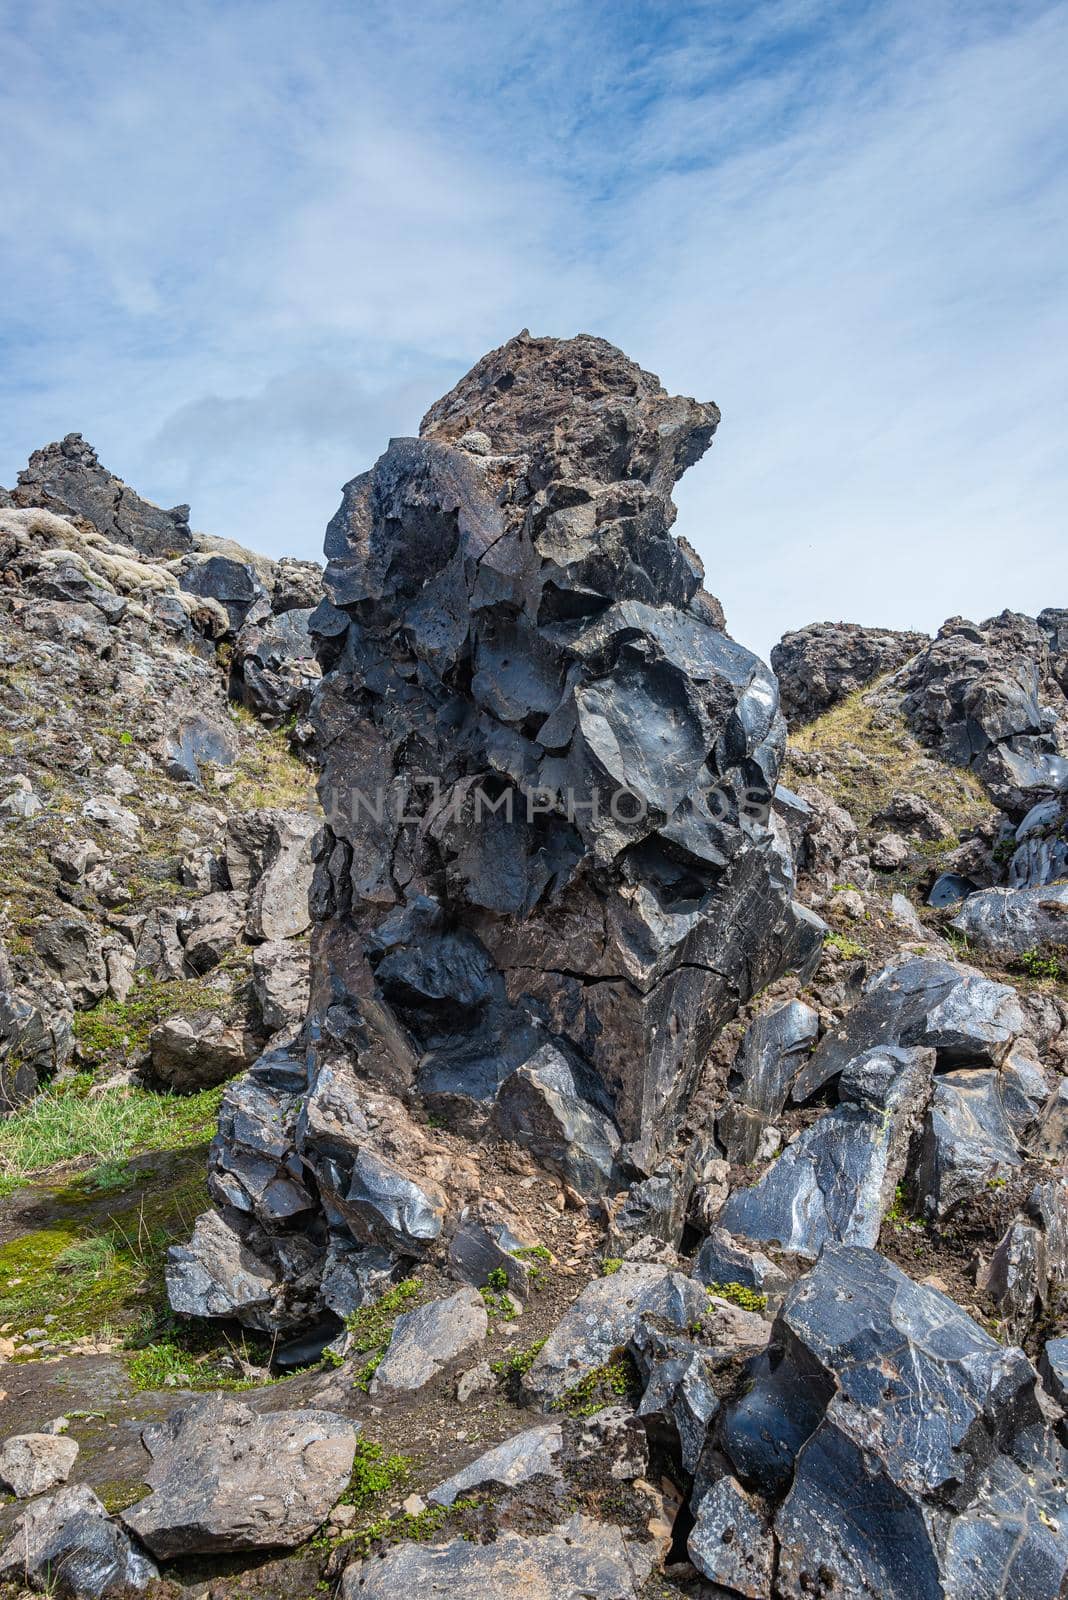 Volcanic glass rock known as obsidian found in lava fields formed by polymerized magma during volcanic eruption in rhyolitic silica, Iceland, details